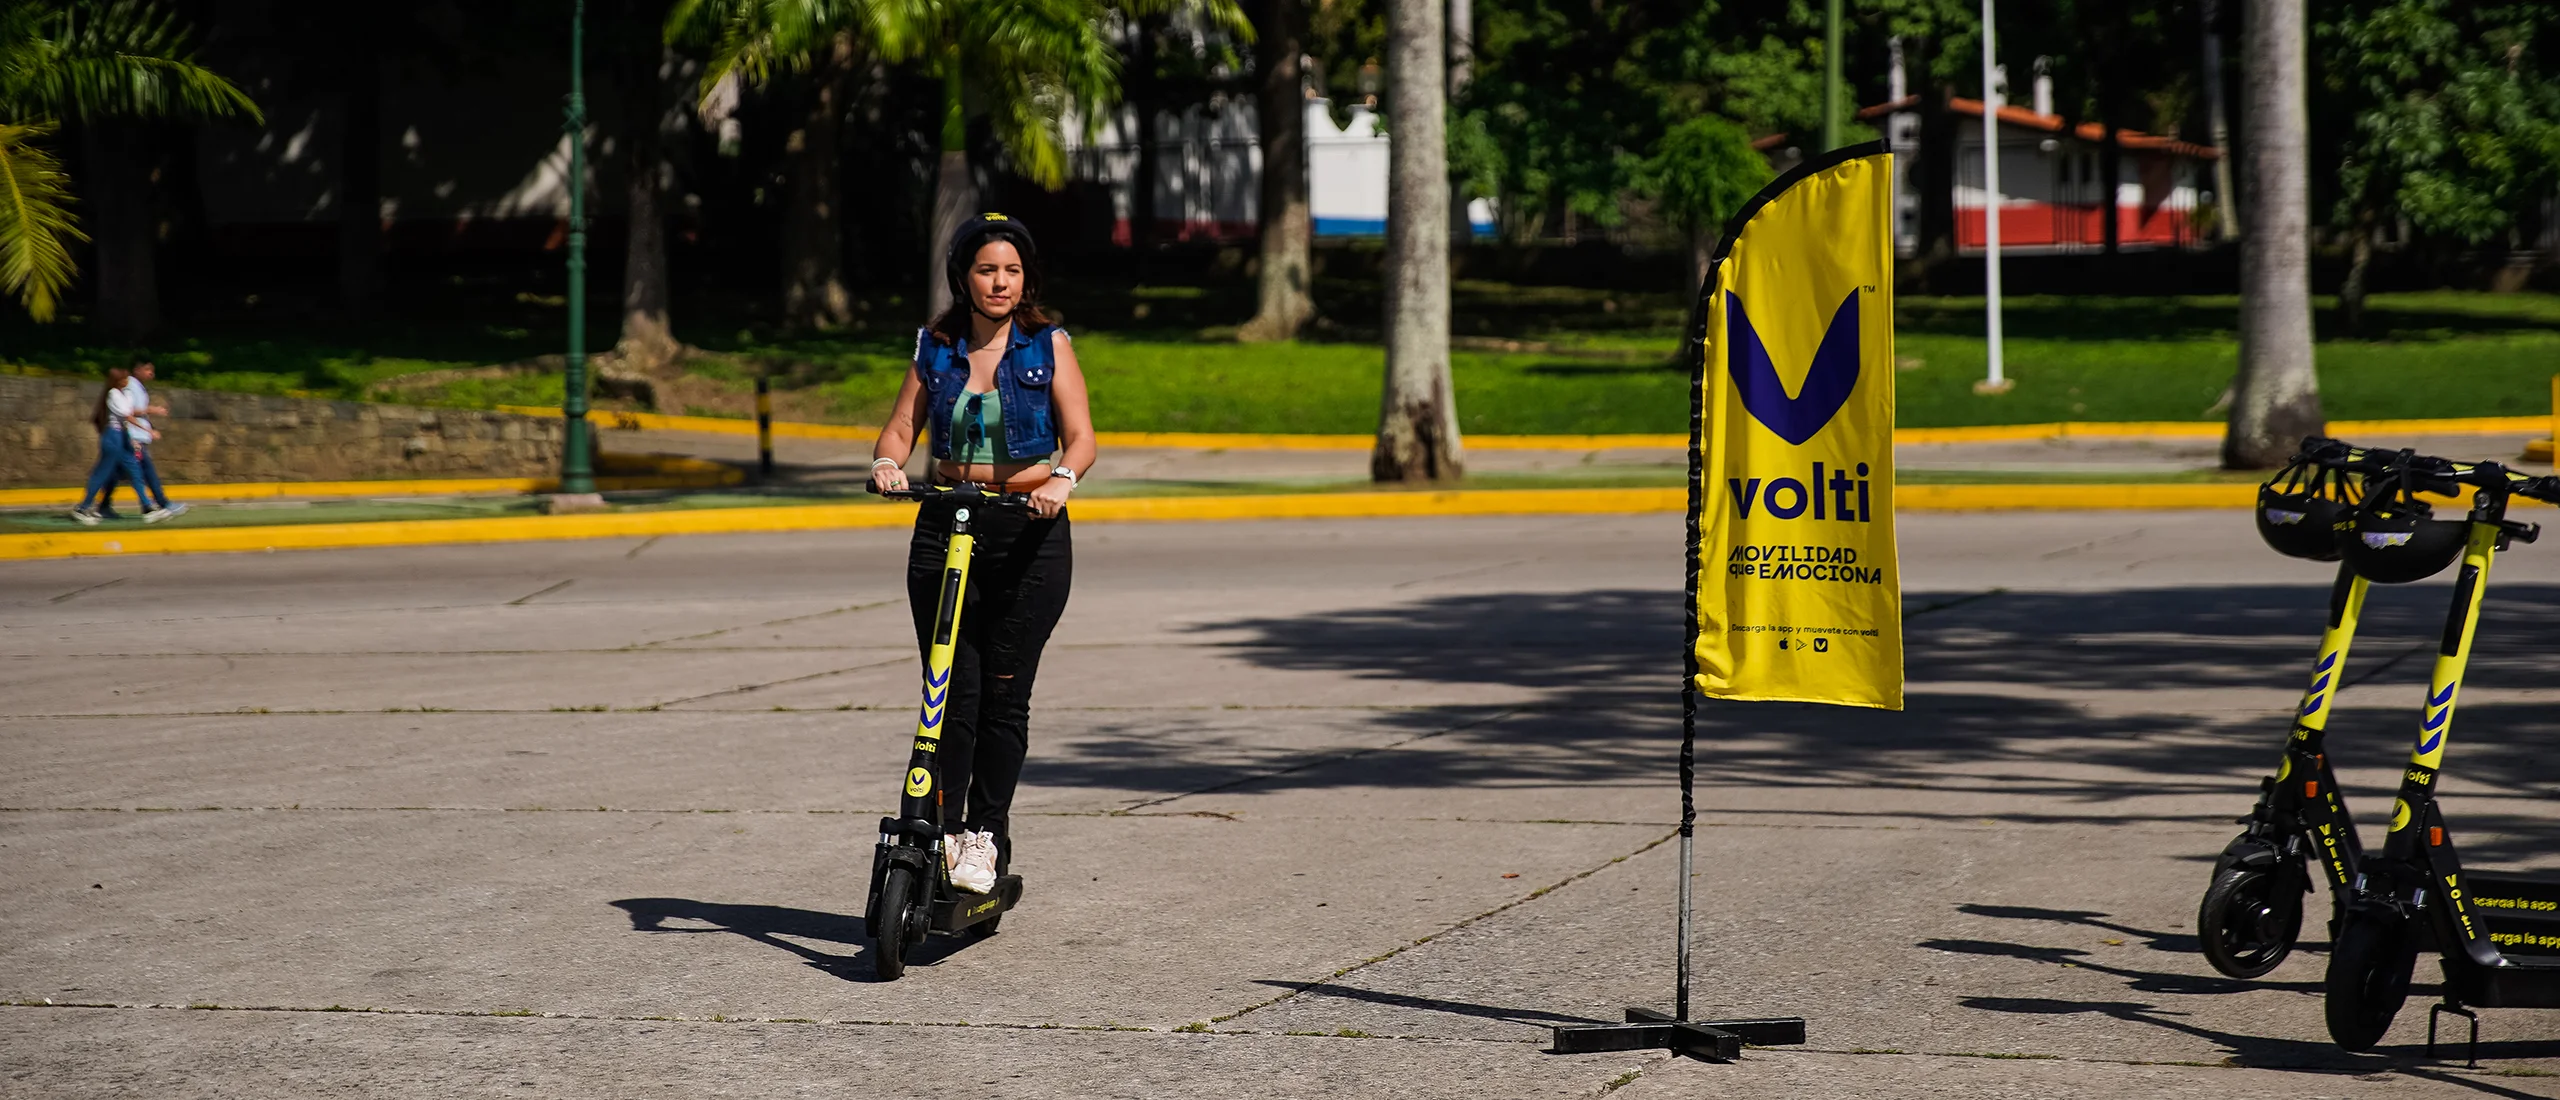 Caracas Electrifies Volti's Revolution in Urban Mobility and Its Commitment to the Environment